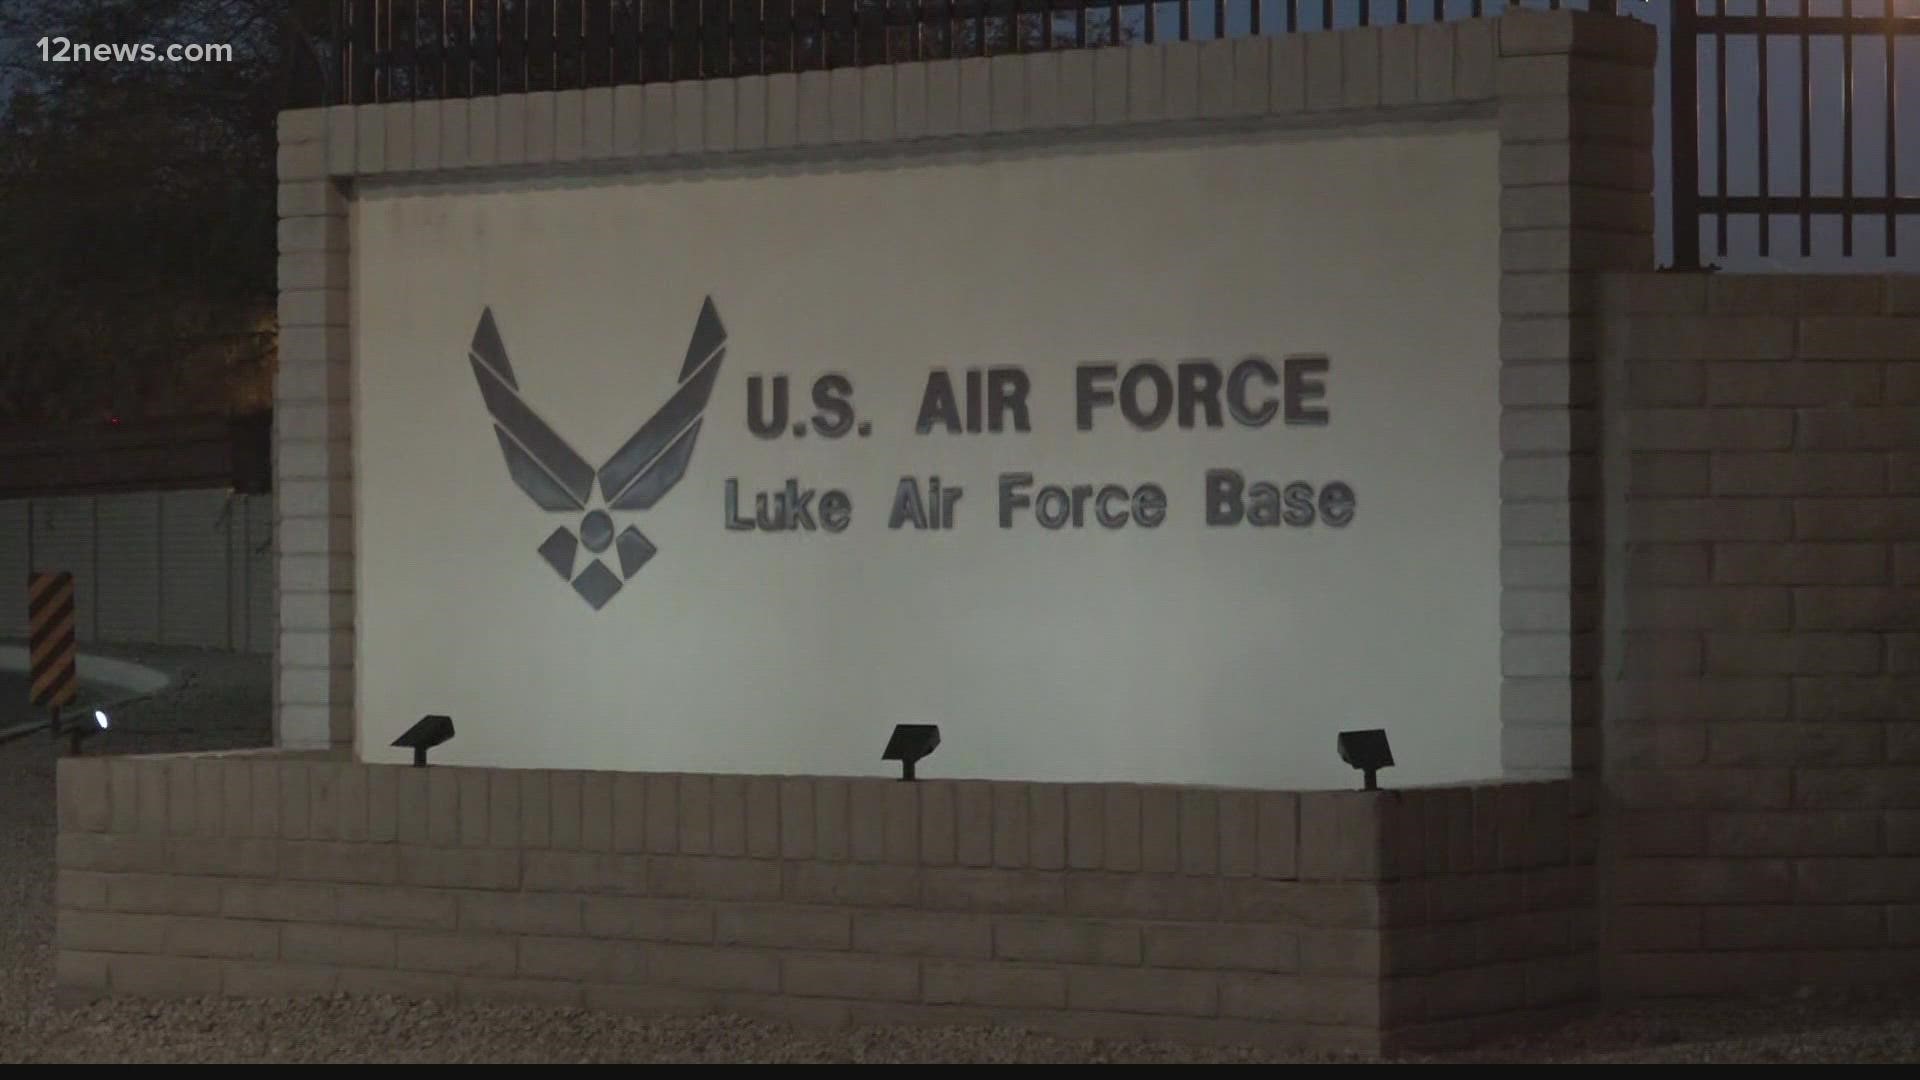 A driver died at Luke Air Force base after incident at South Gate Security checkpoint, officials say.